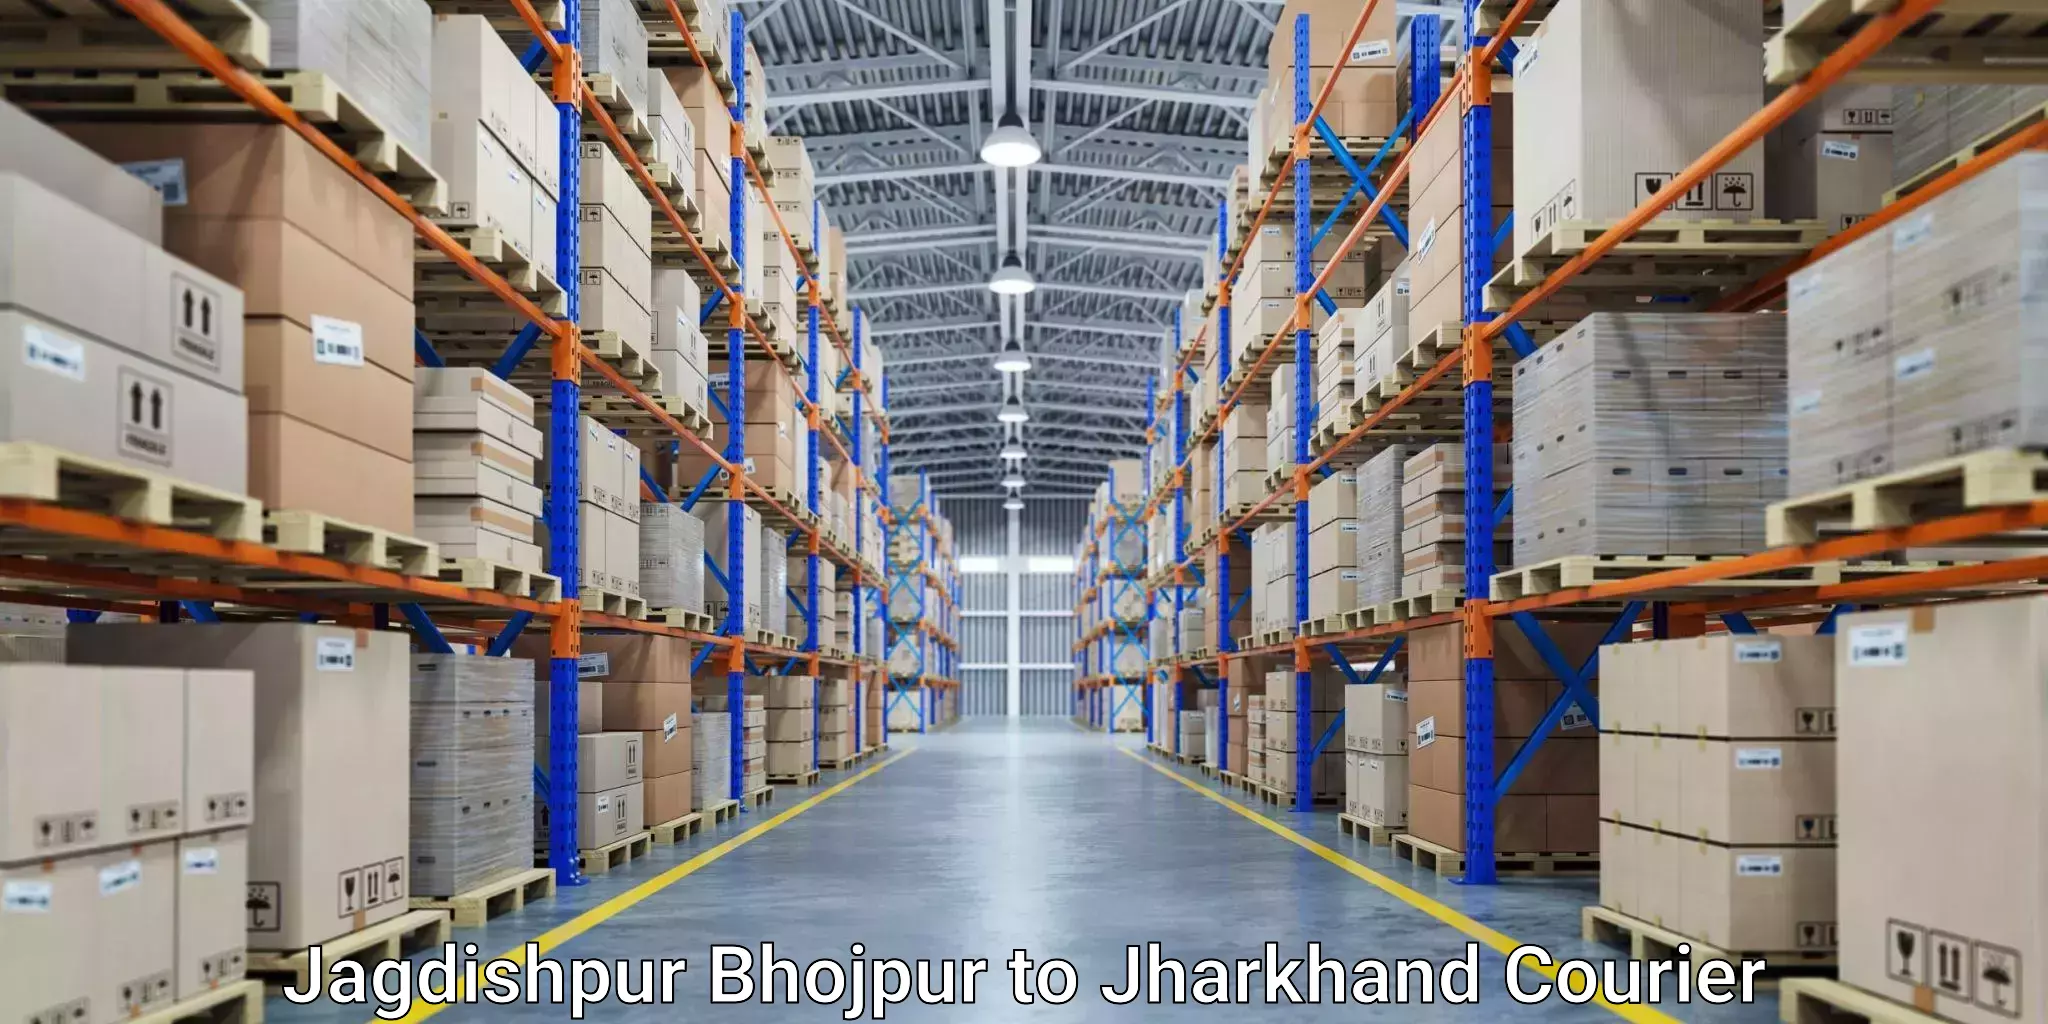 Reliable parcel services Jagdishpur Bhojpur to Topchanchi